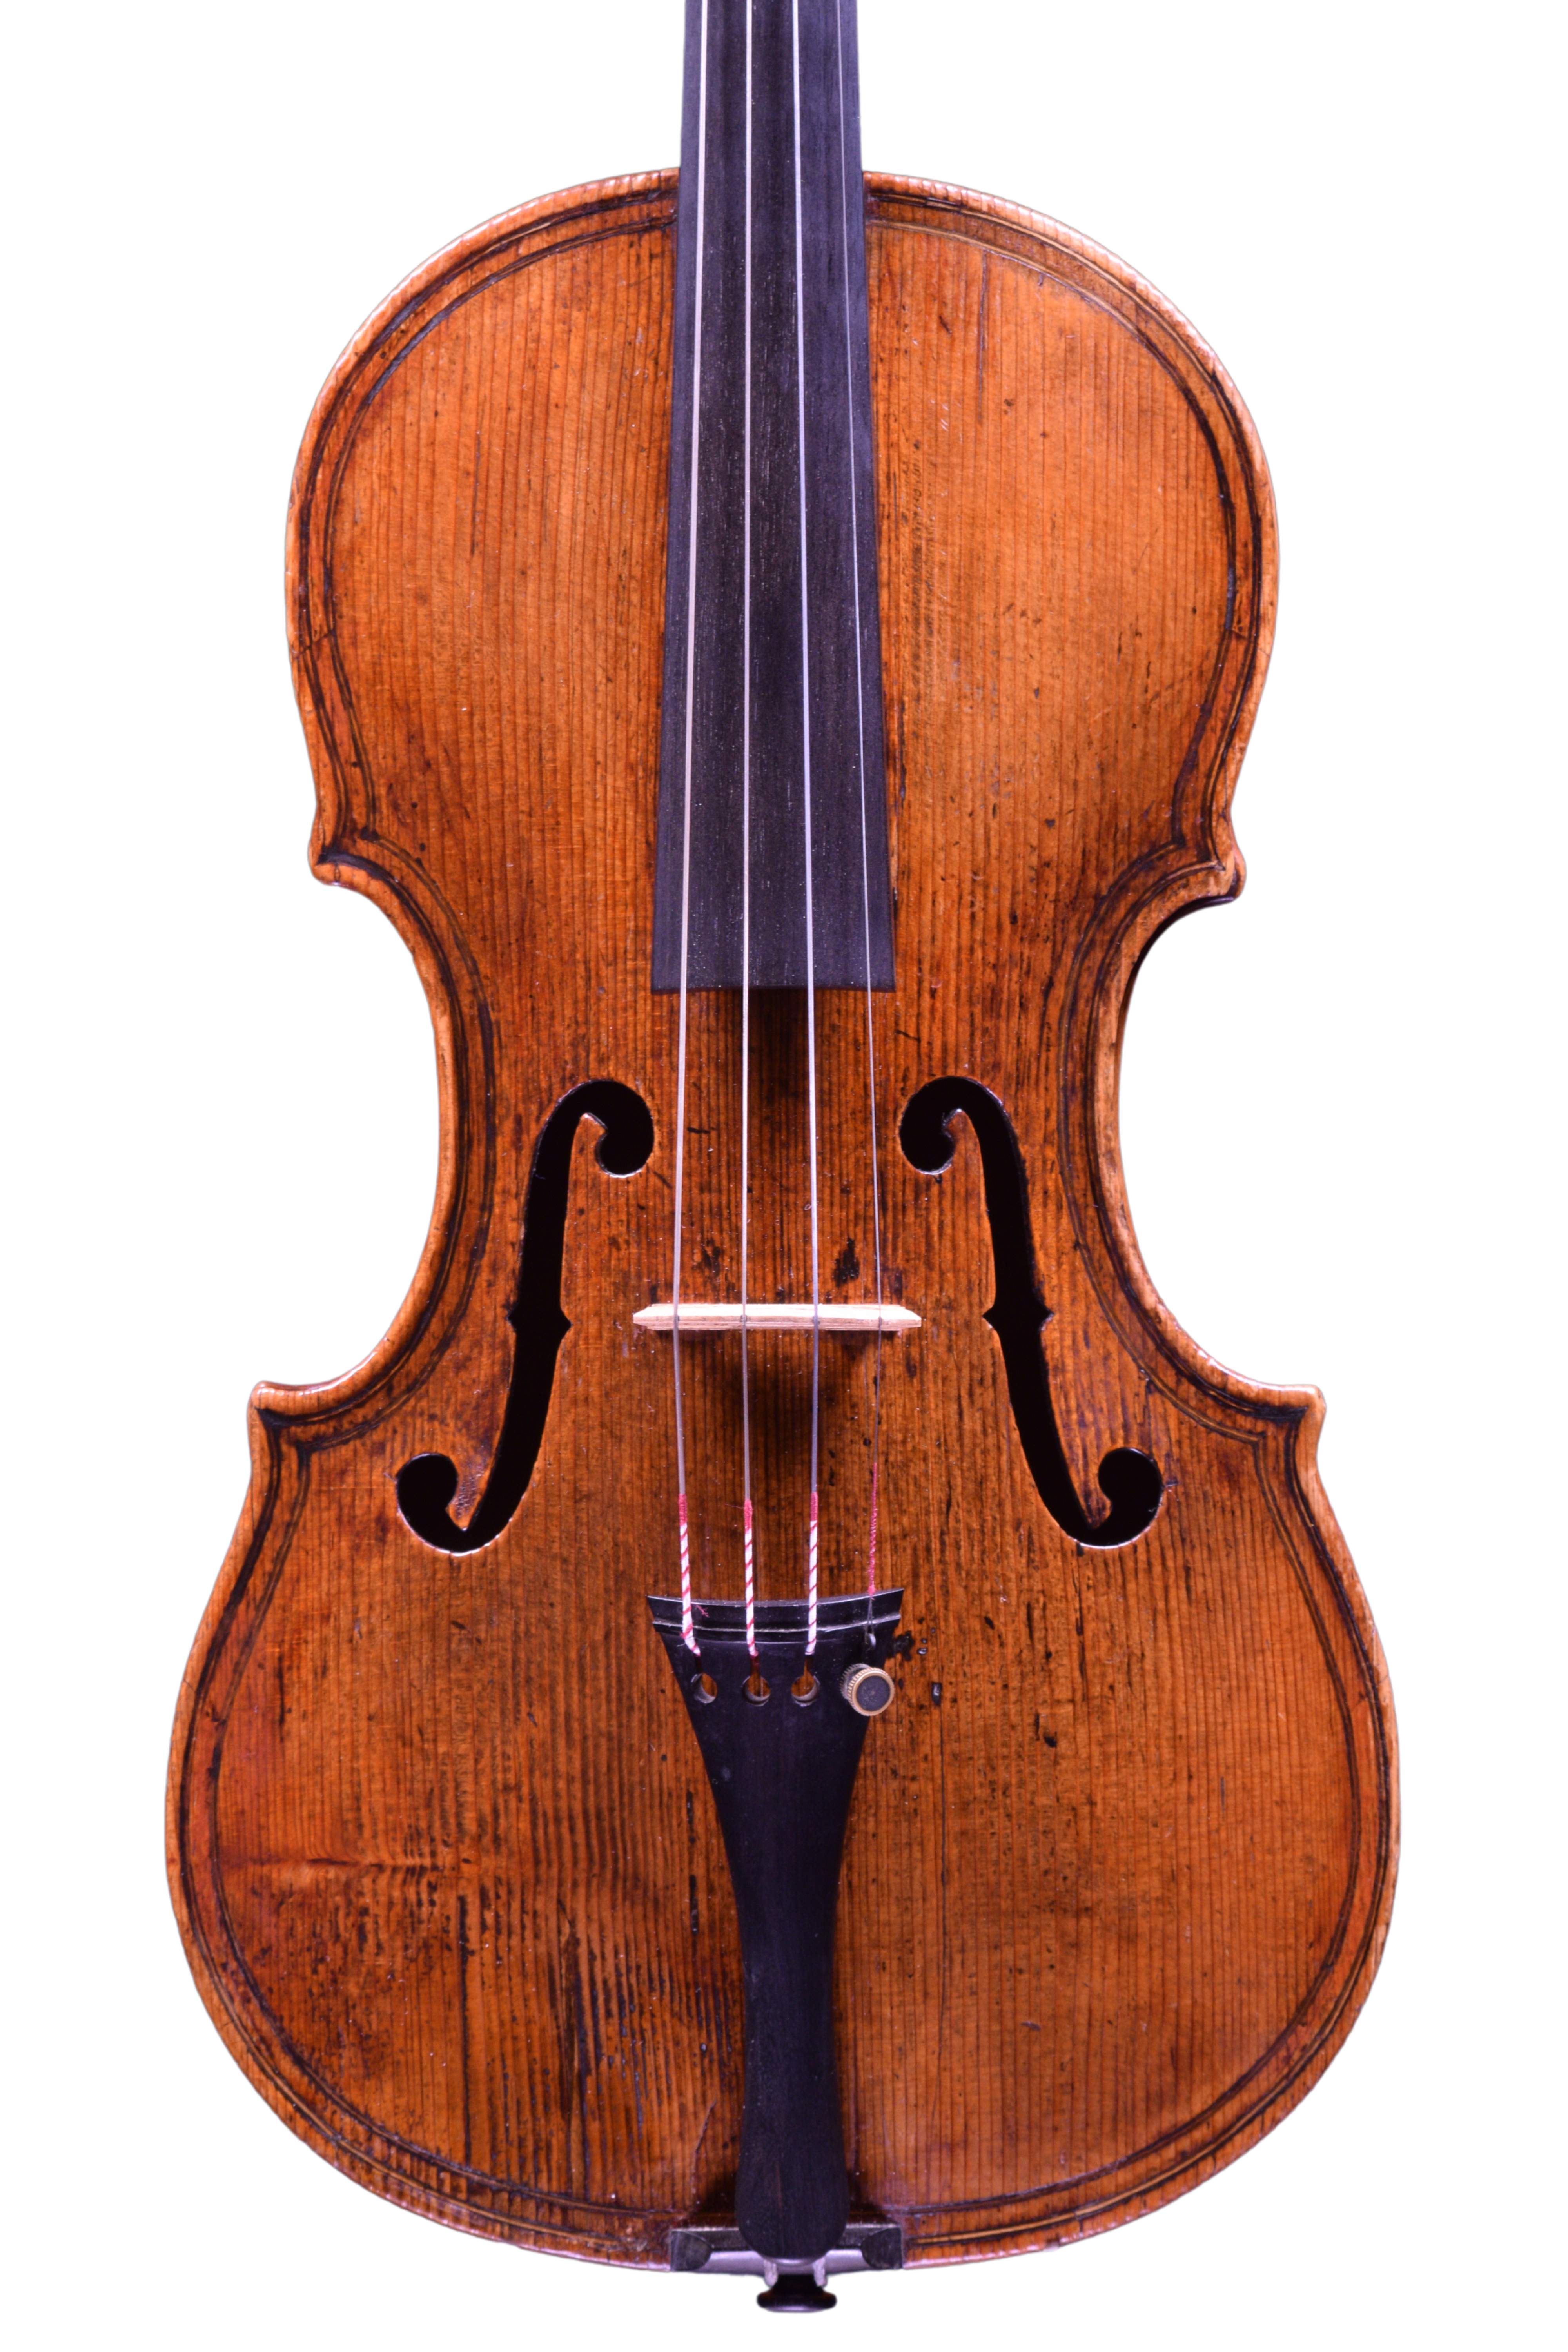 We are delighted to have a stunning Maggini violin available for sale